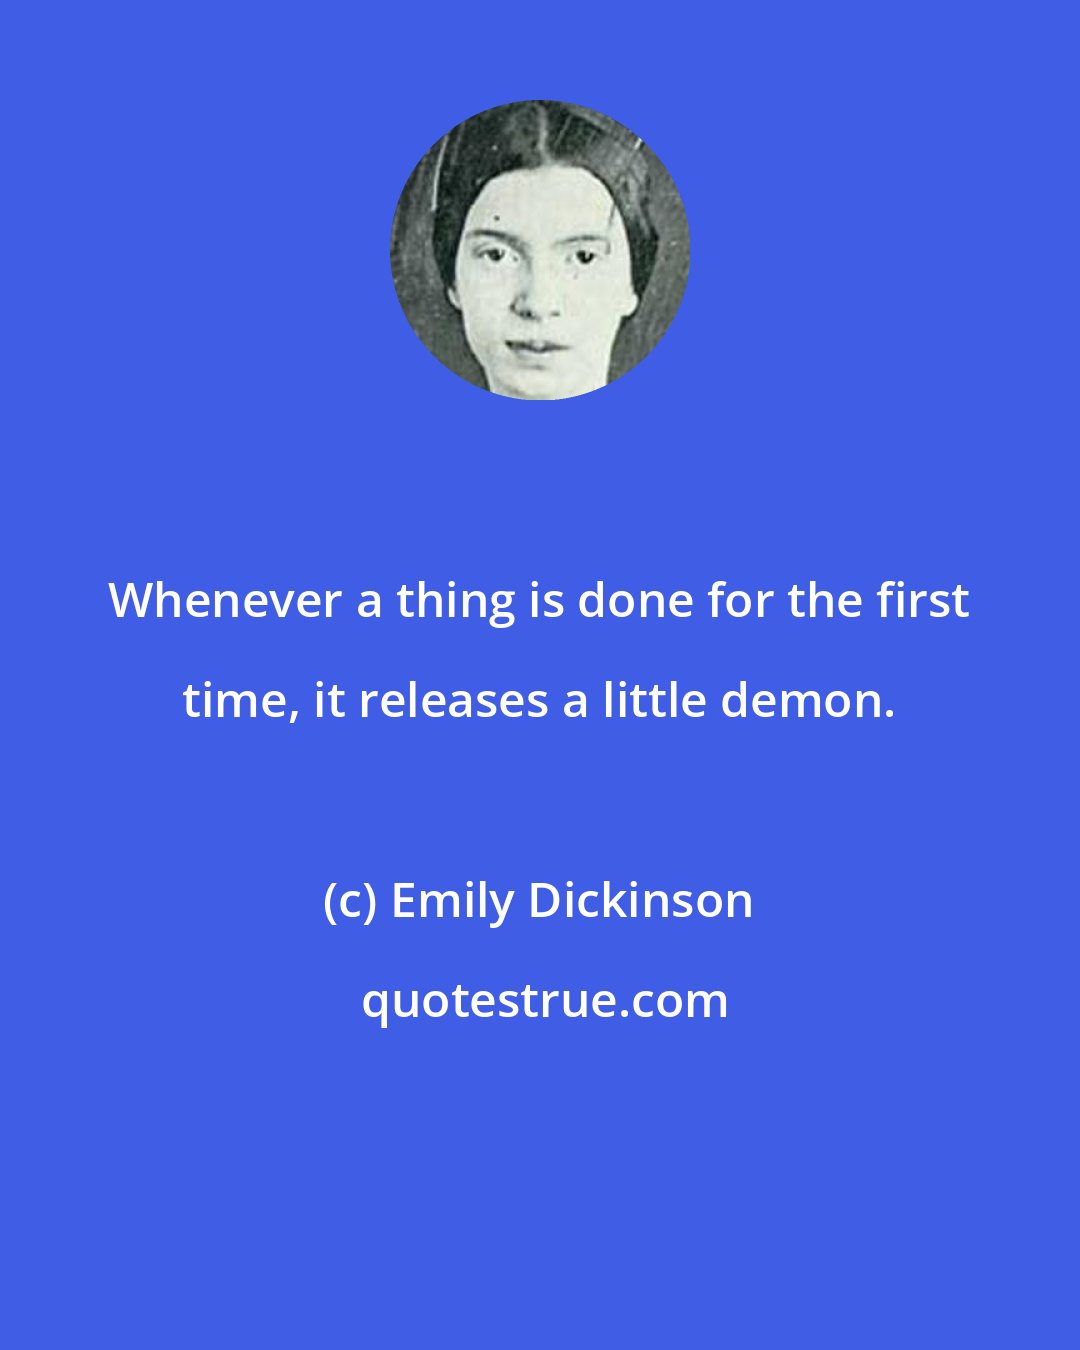 Emily Dickinson: Whenever a thing is done for the first time, it releases a little demon.